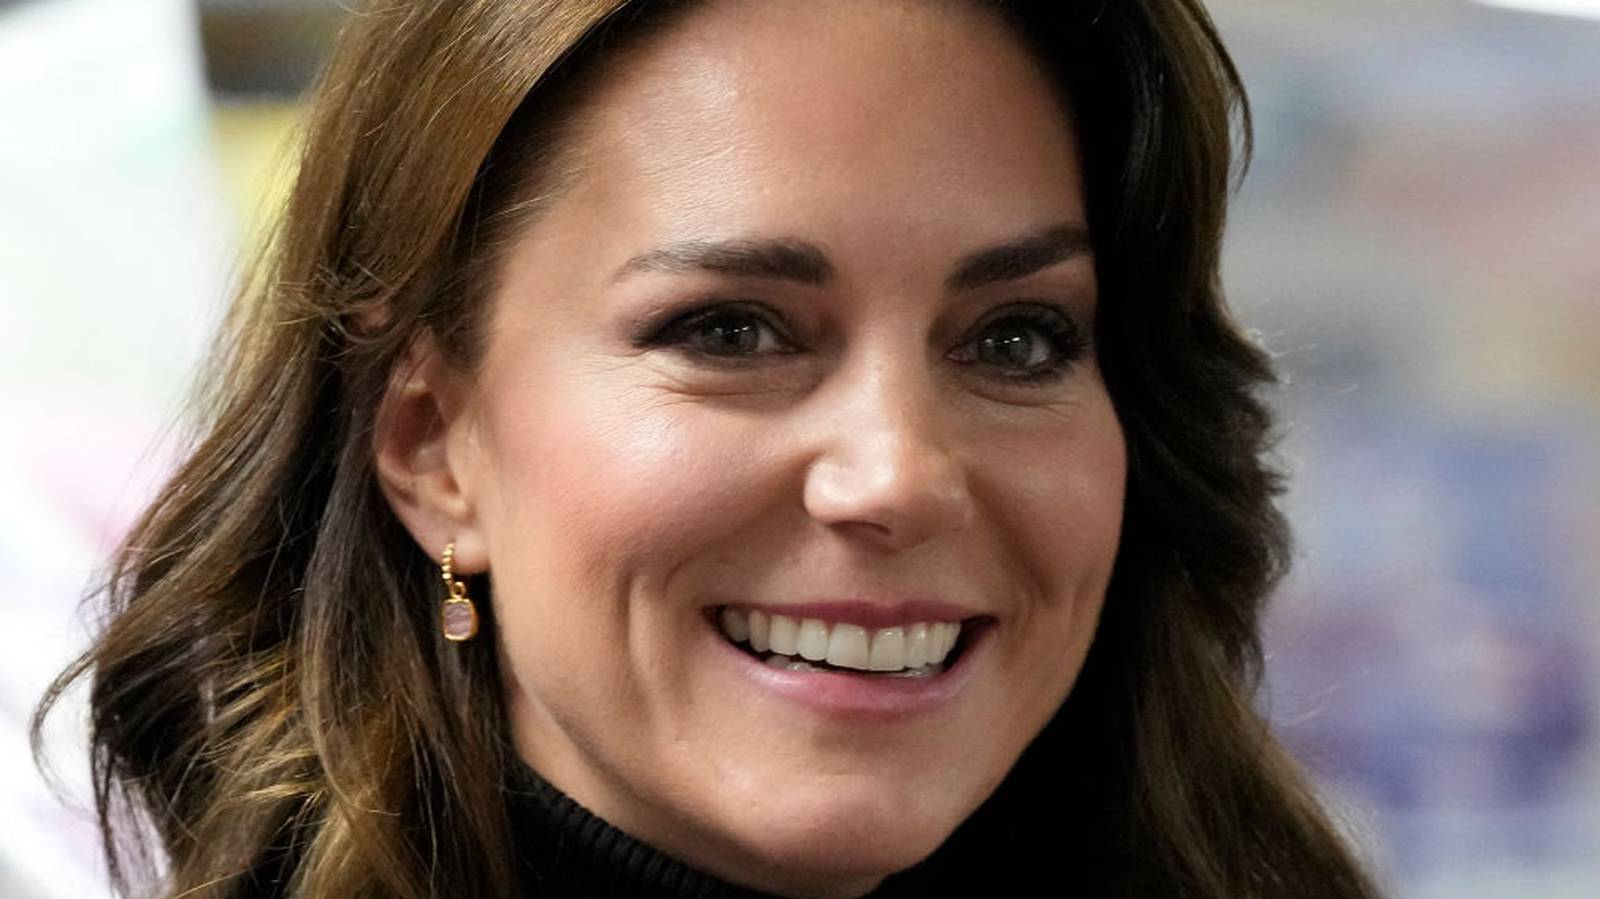 Reactions from around the world following Princess Kate’s cancer